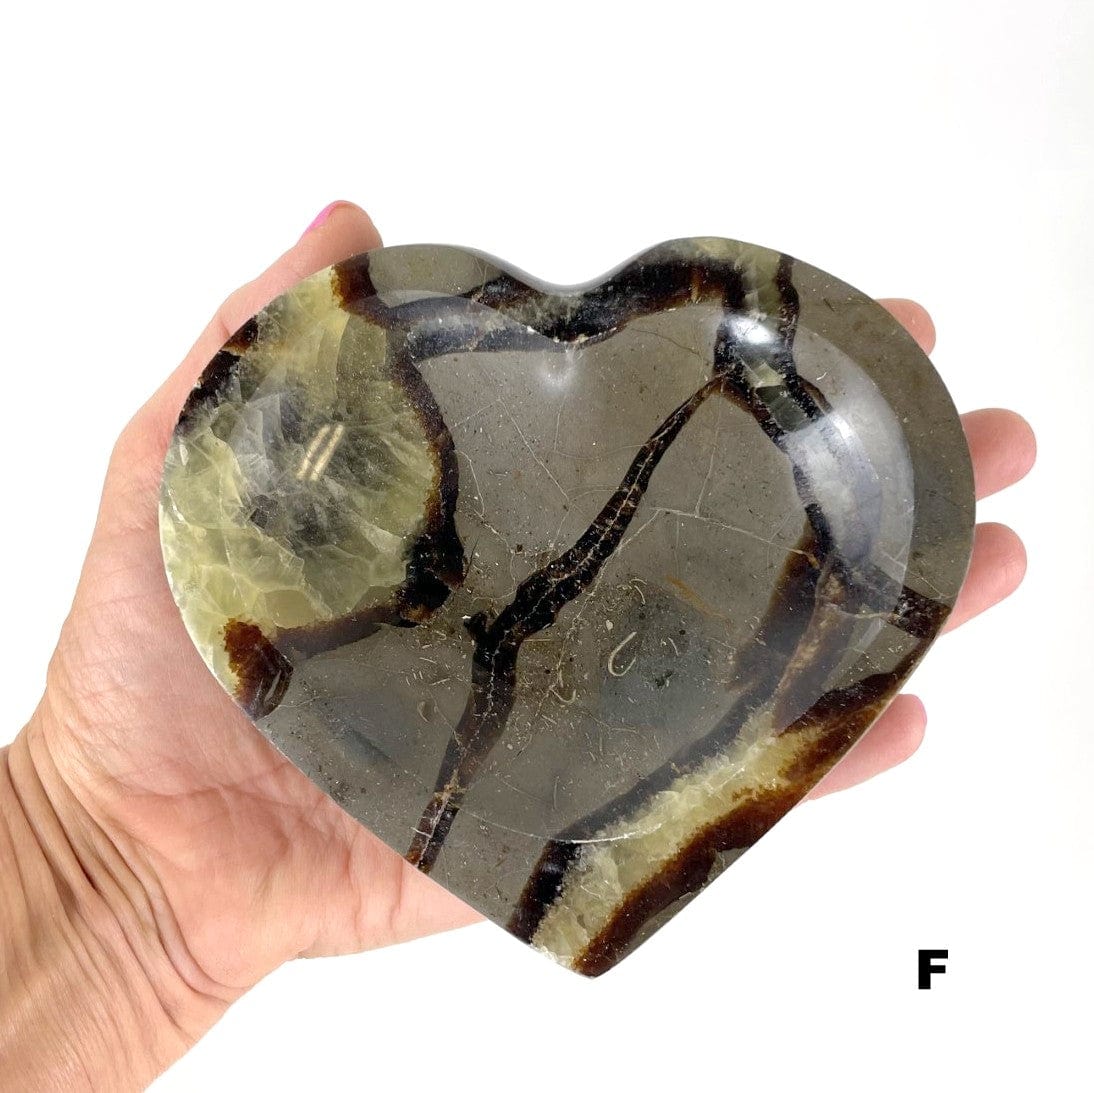 Septarian Heart Bowl - Polished Stone Dish #F in hand for size reference and formation differences